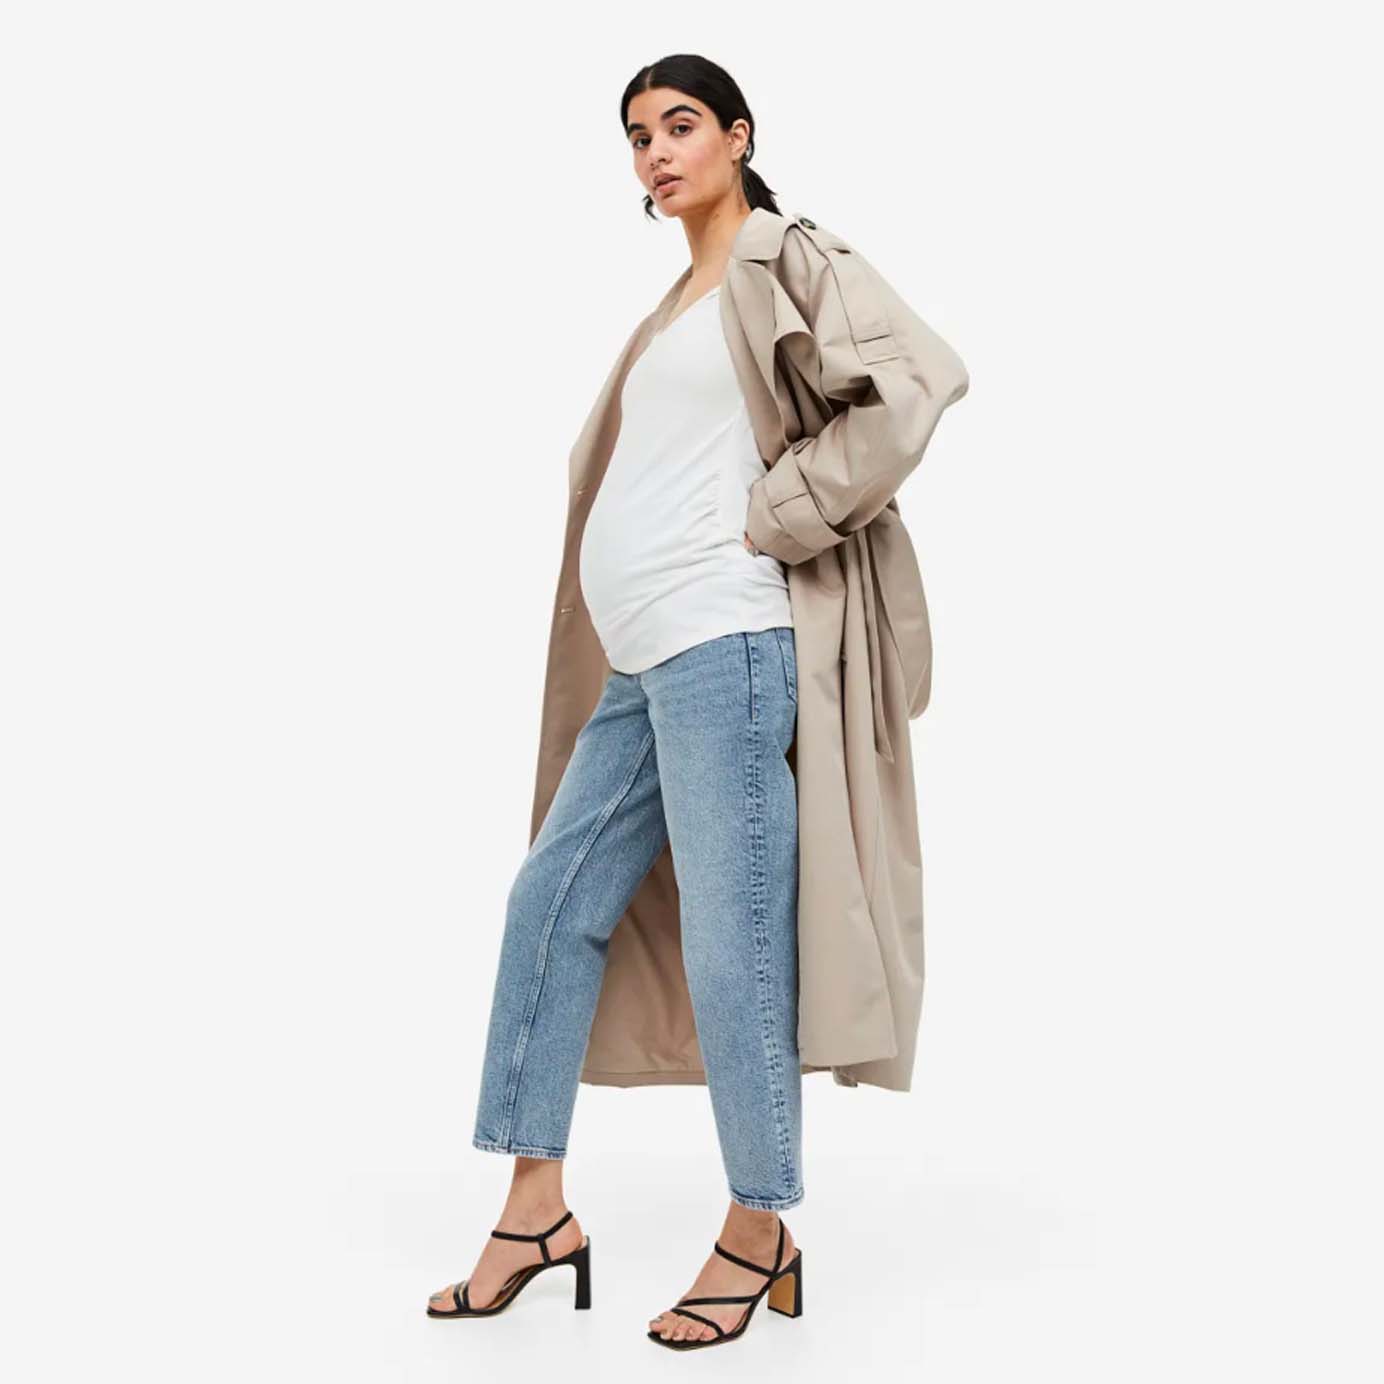 Model wearing straight cut maternity jeans and a trench coat